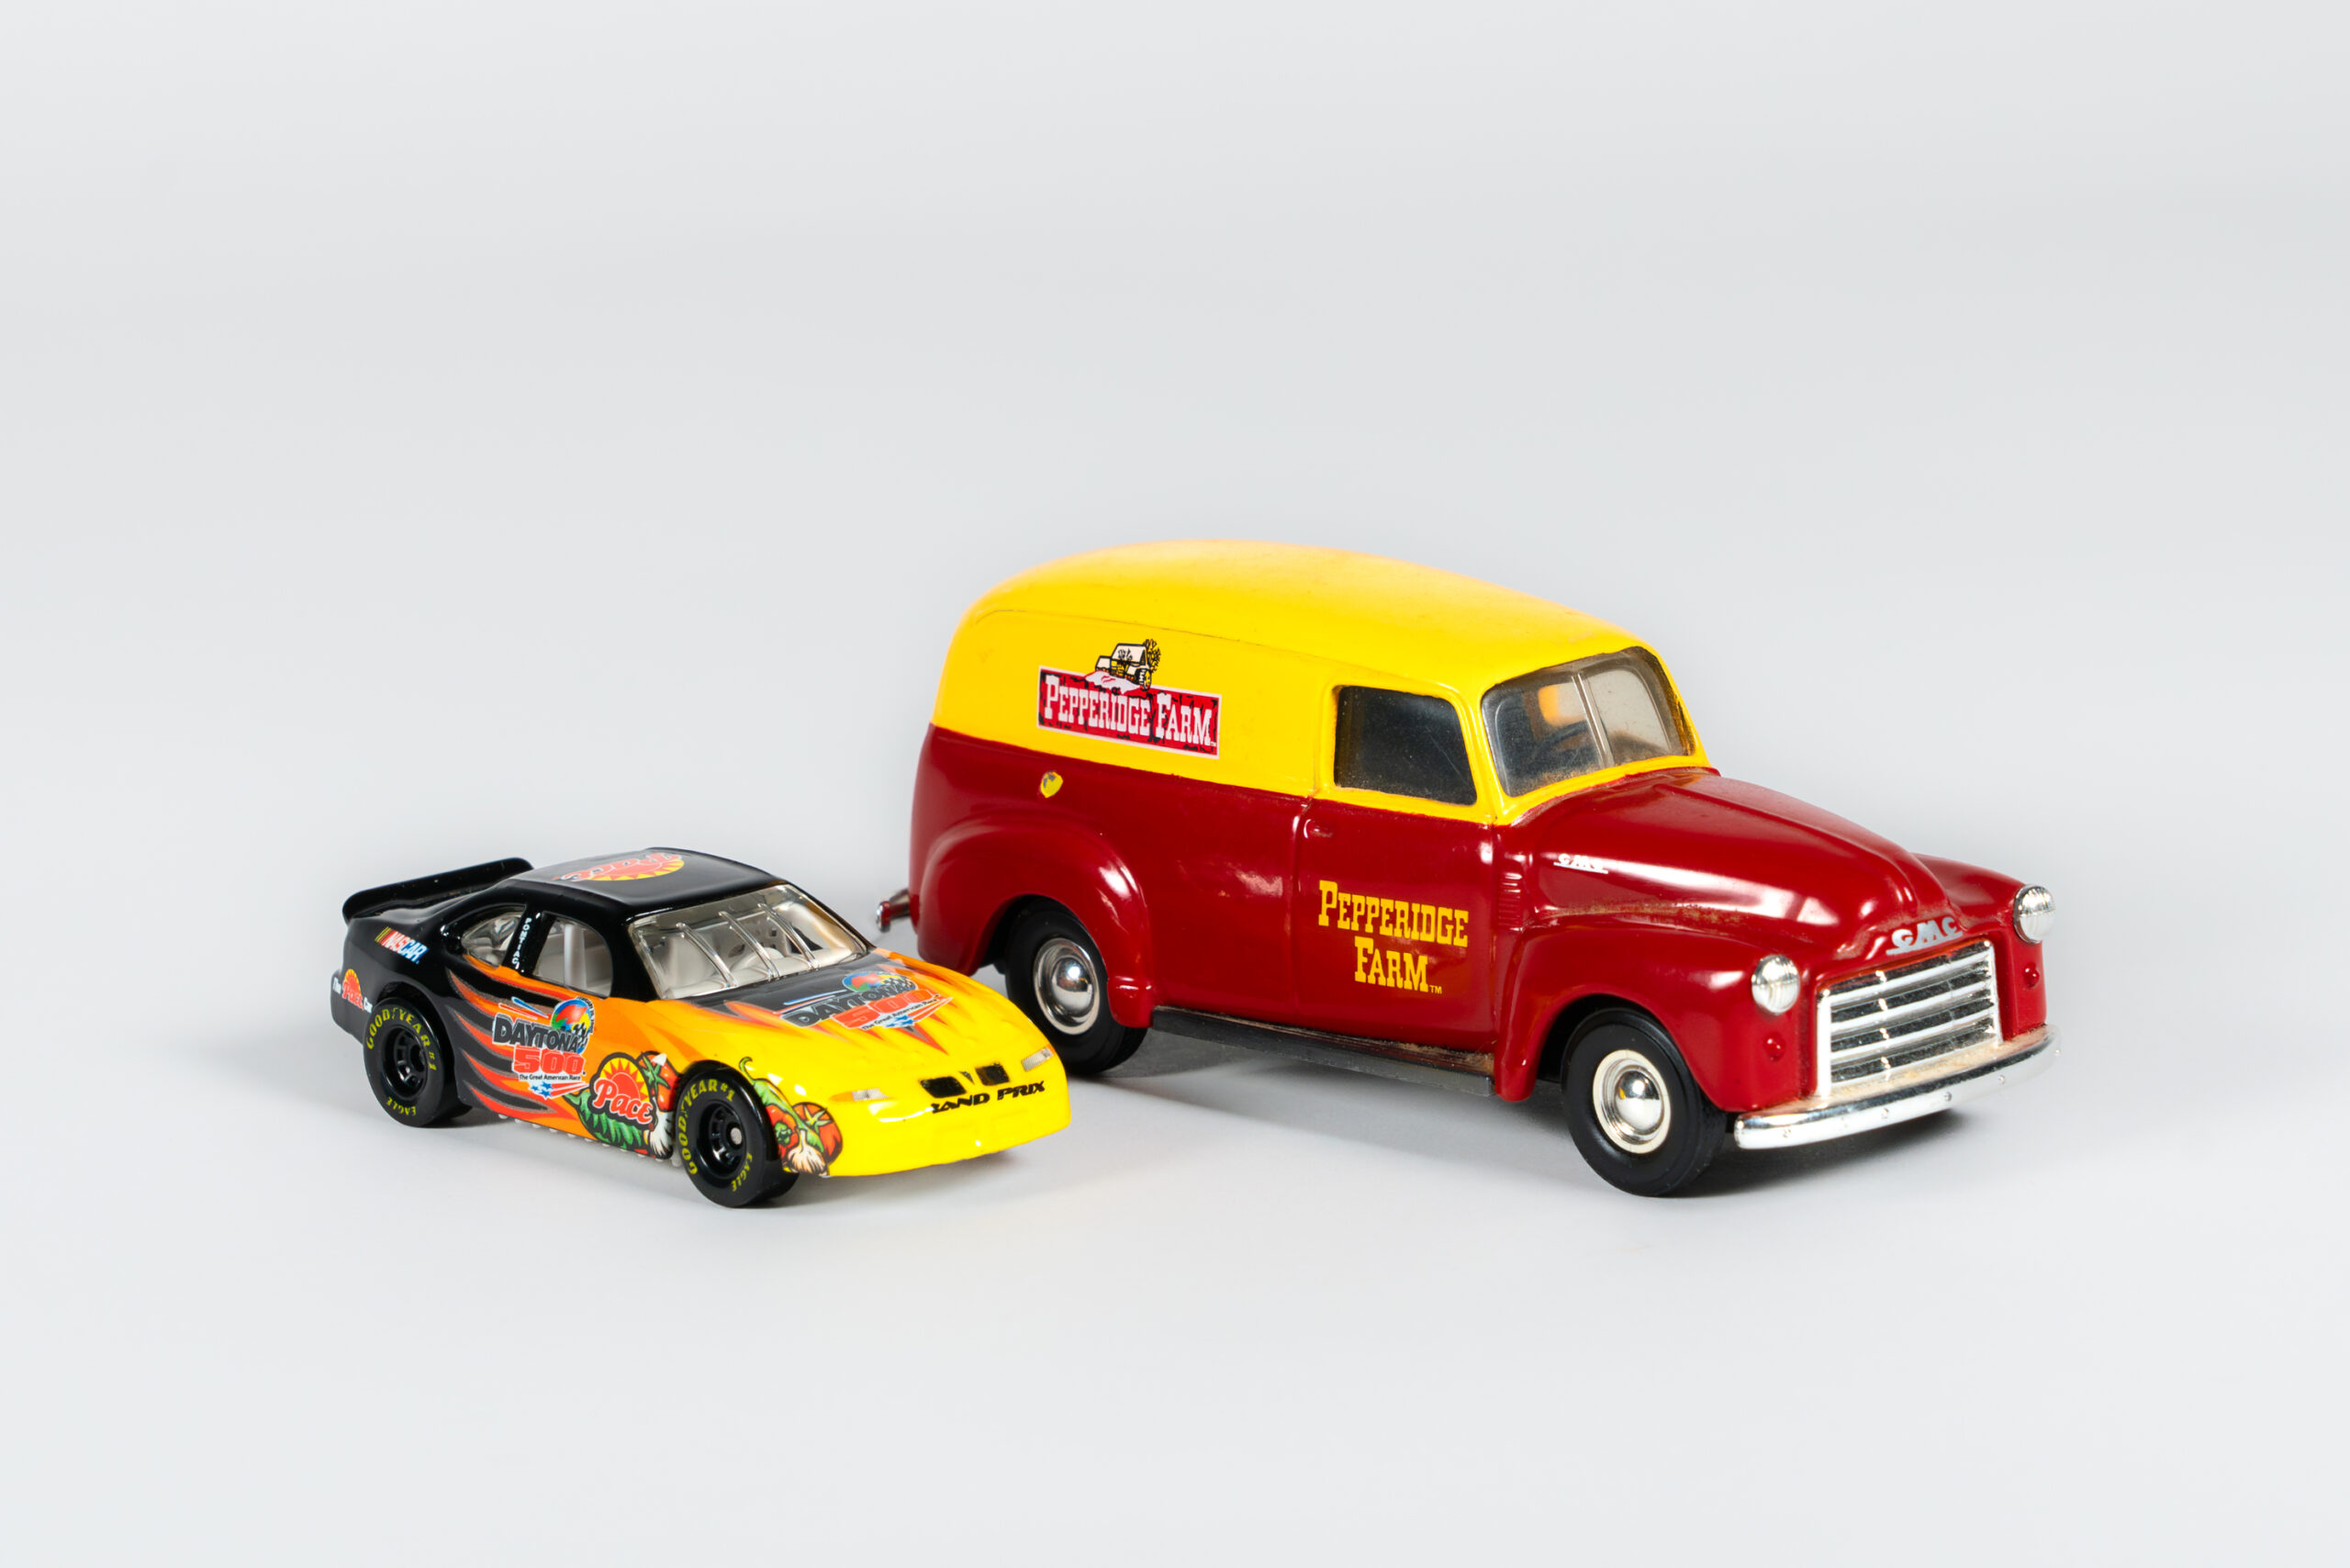 Pepperidge Farm toy truck and Pace toy race car